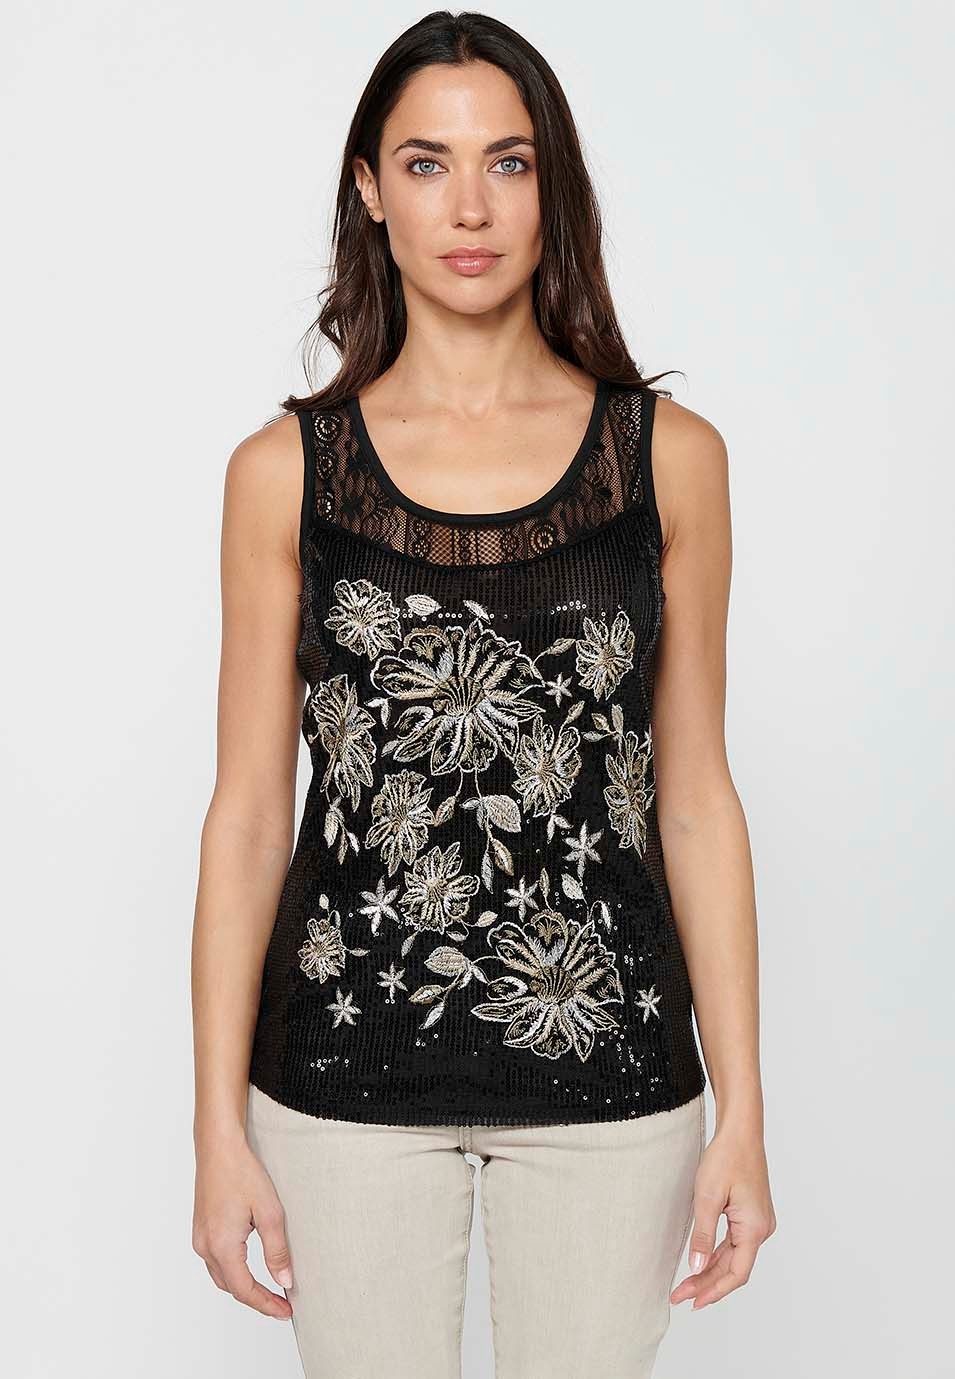 Sleeveless T-shirt with embroidered and sequined front details in Black for Women 2